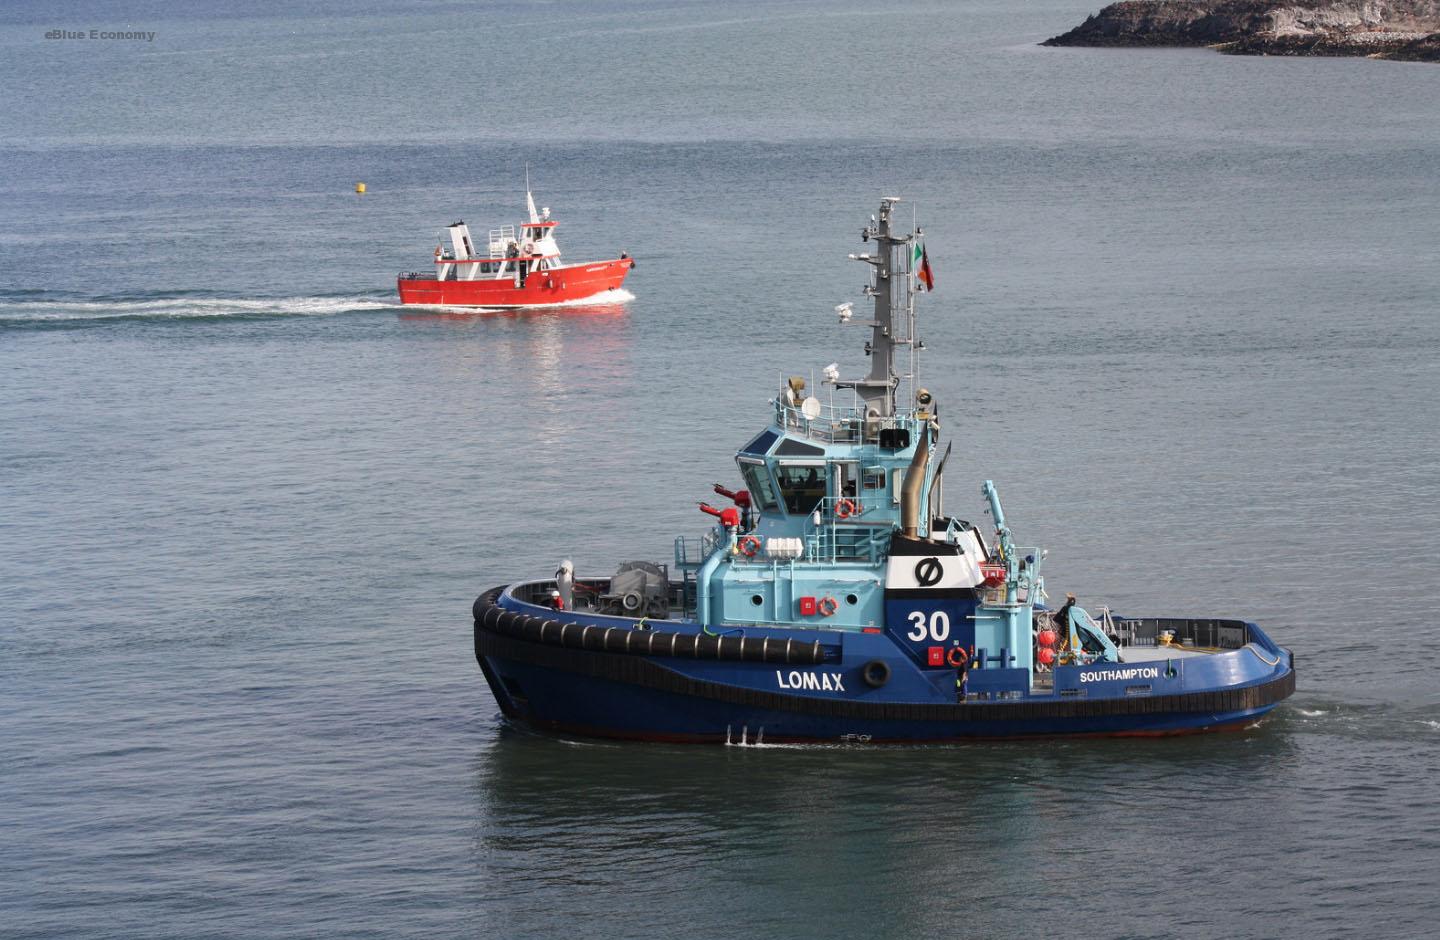 eblue_economy_Tugs Towing & Offshore Newsletter 66 2021 PDF